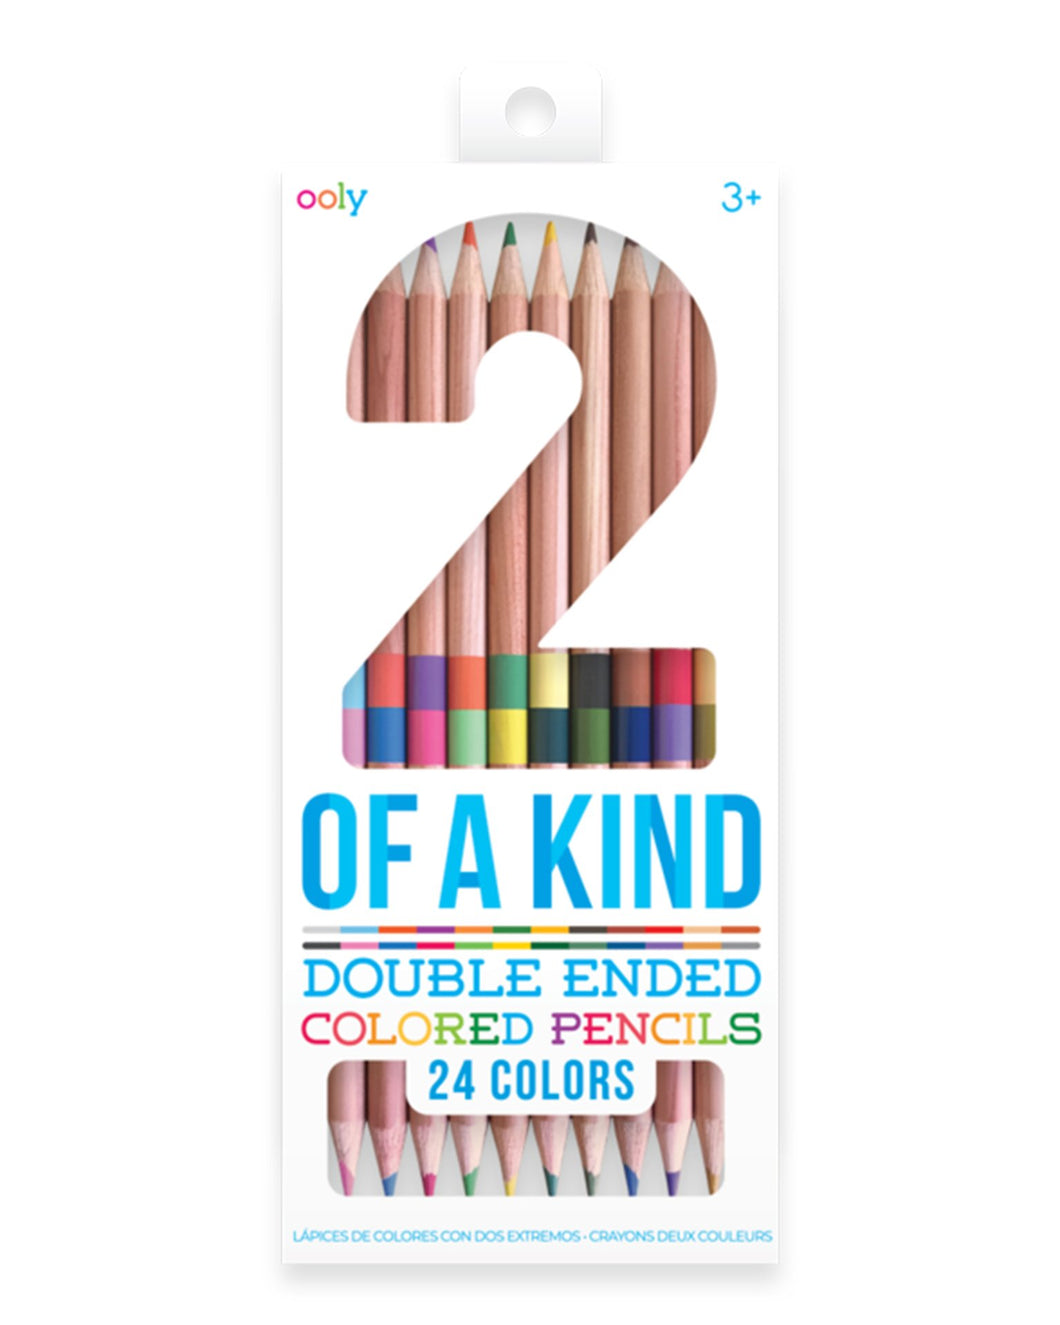 ooly - 2 of a Kind Double Ended Colored Pencils (12)